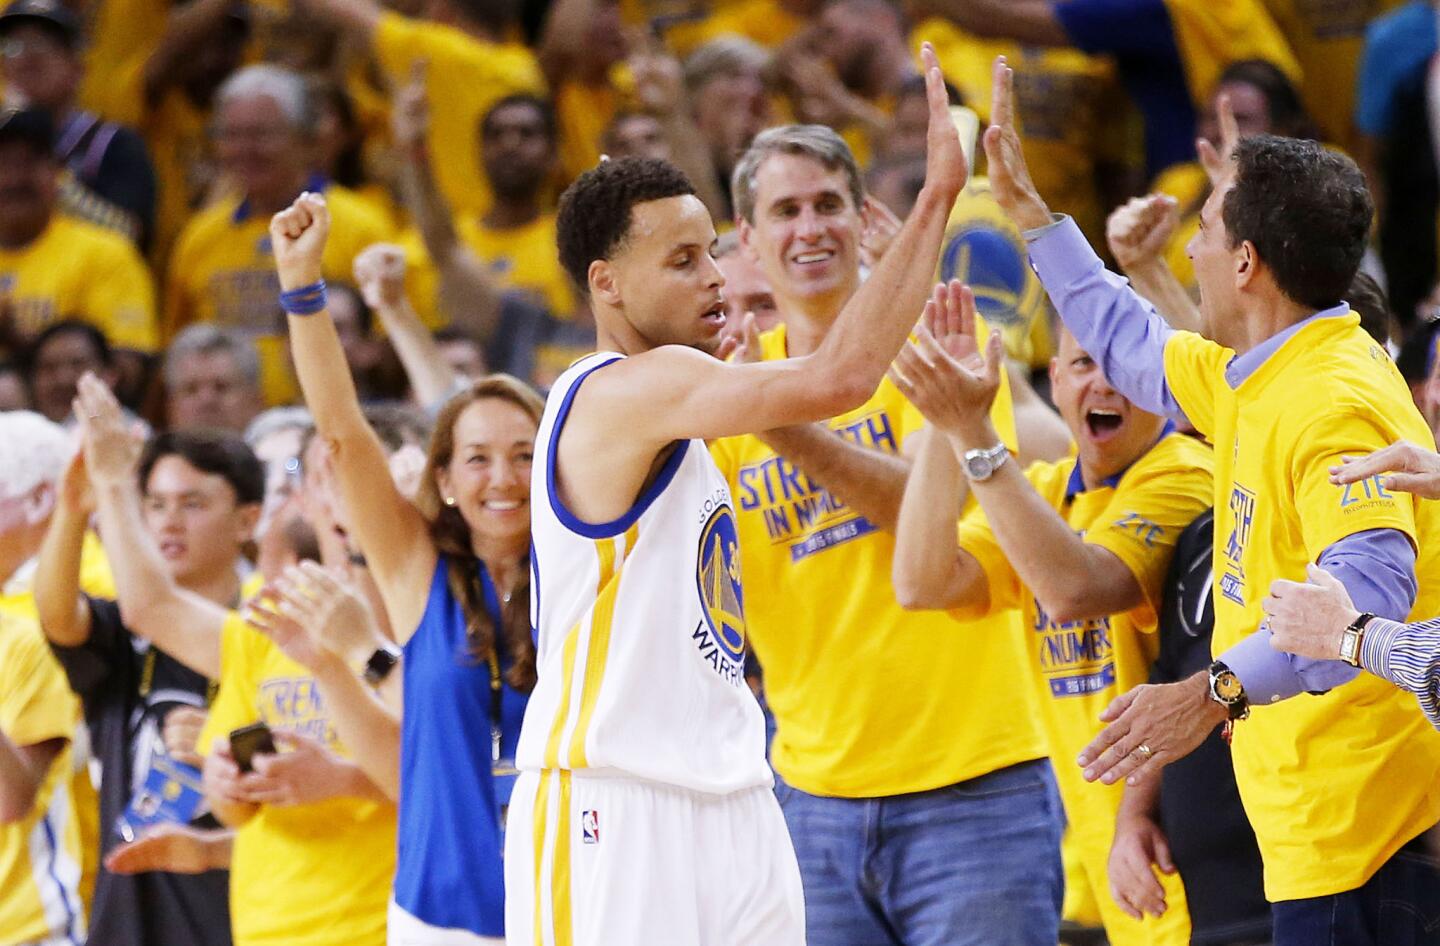 Warriors guard Stephen Curry celebrates with fans after making a shot against the Cavaliers in the fourth quarter of Game 5 of the NBA Finals on Sunday evening in Oakland.